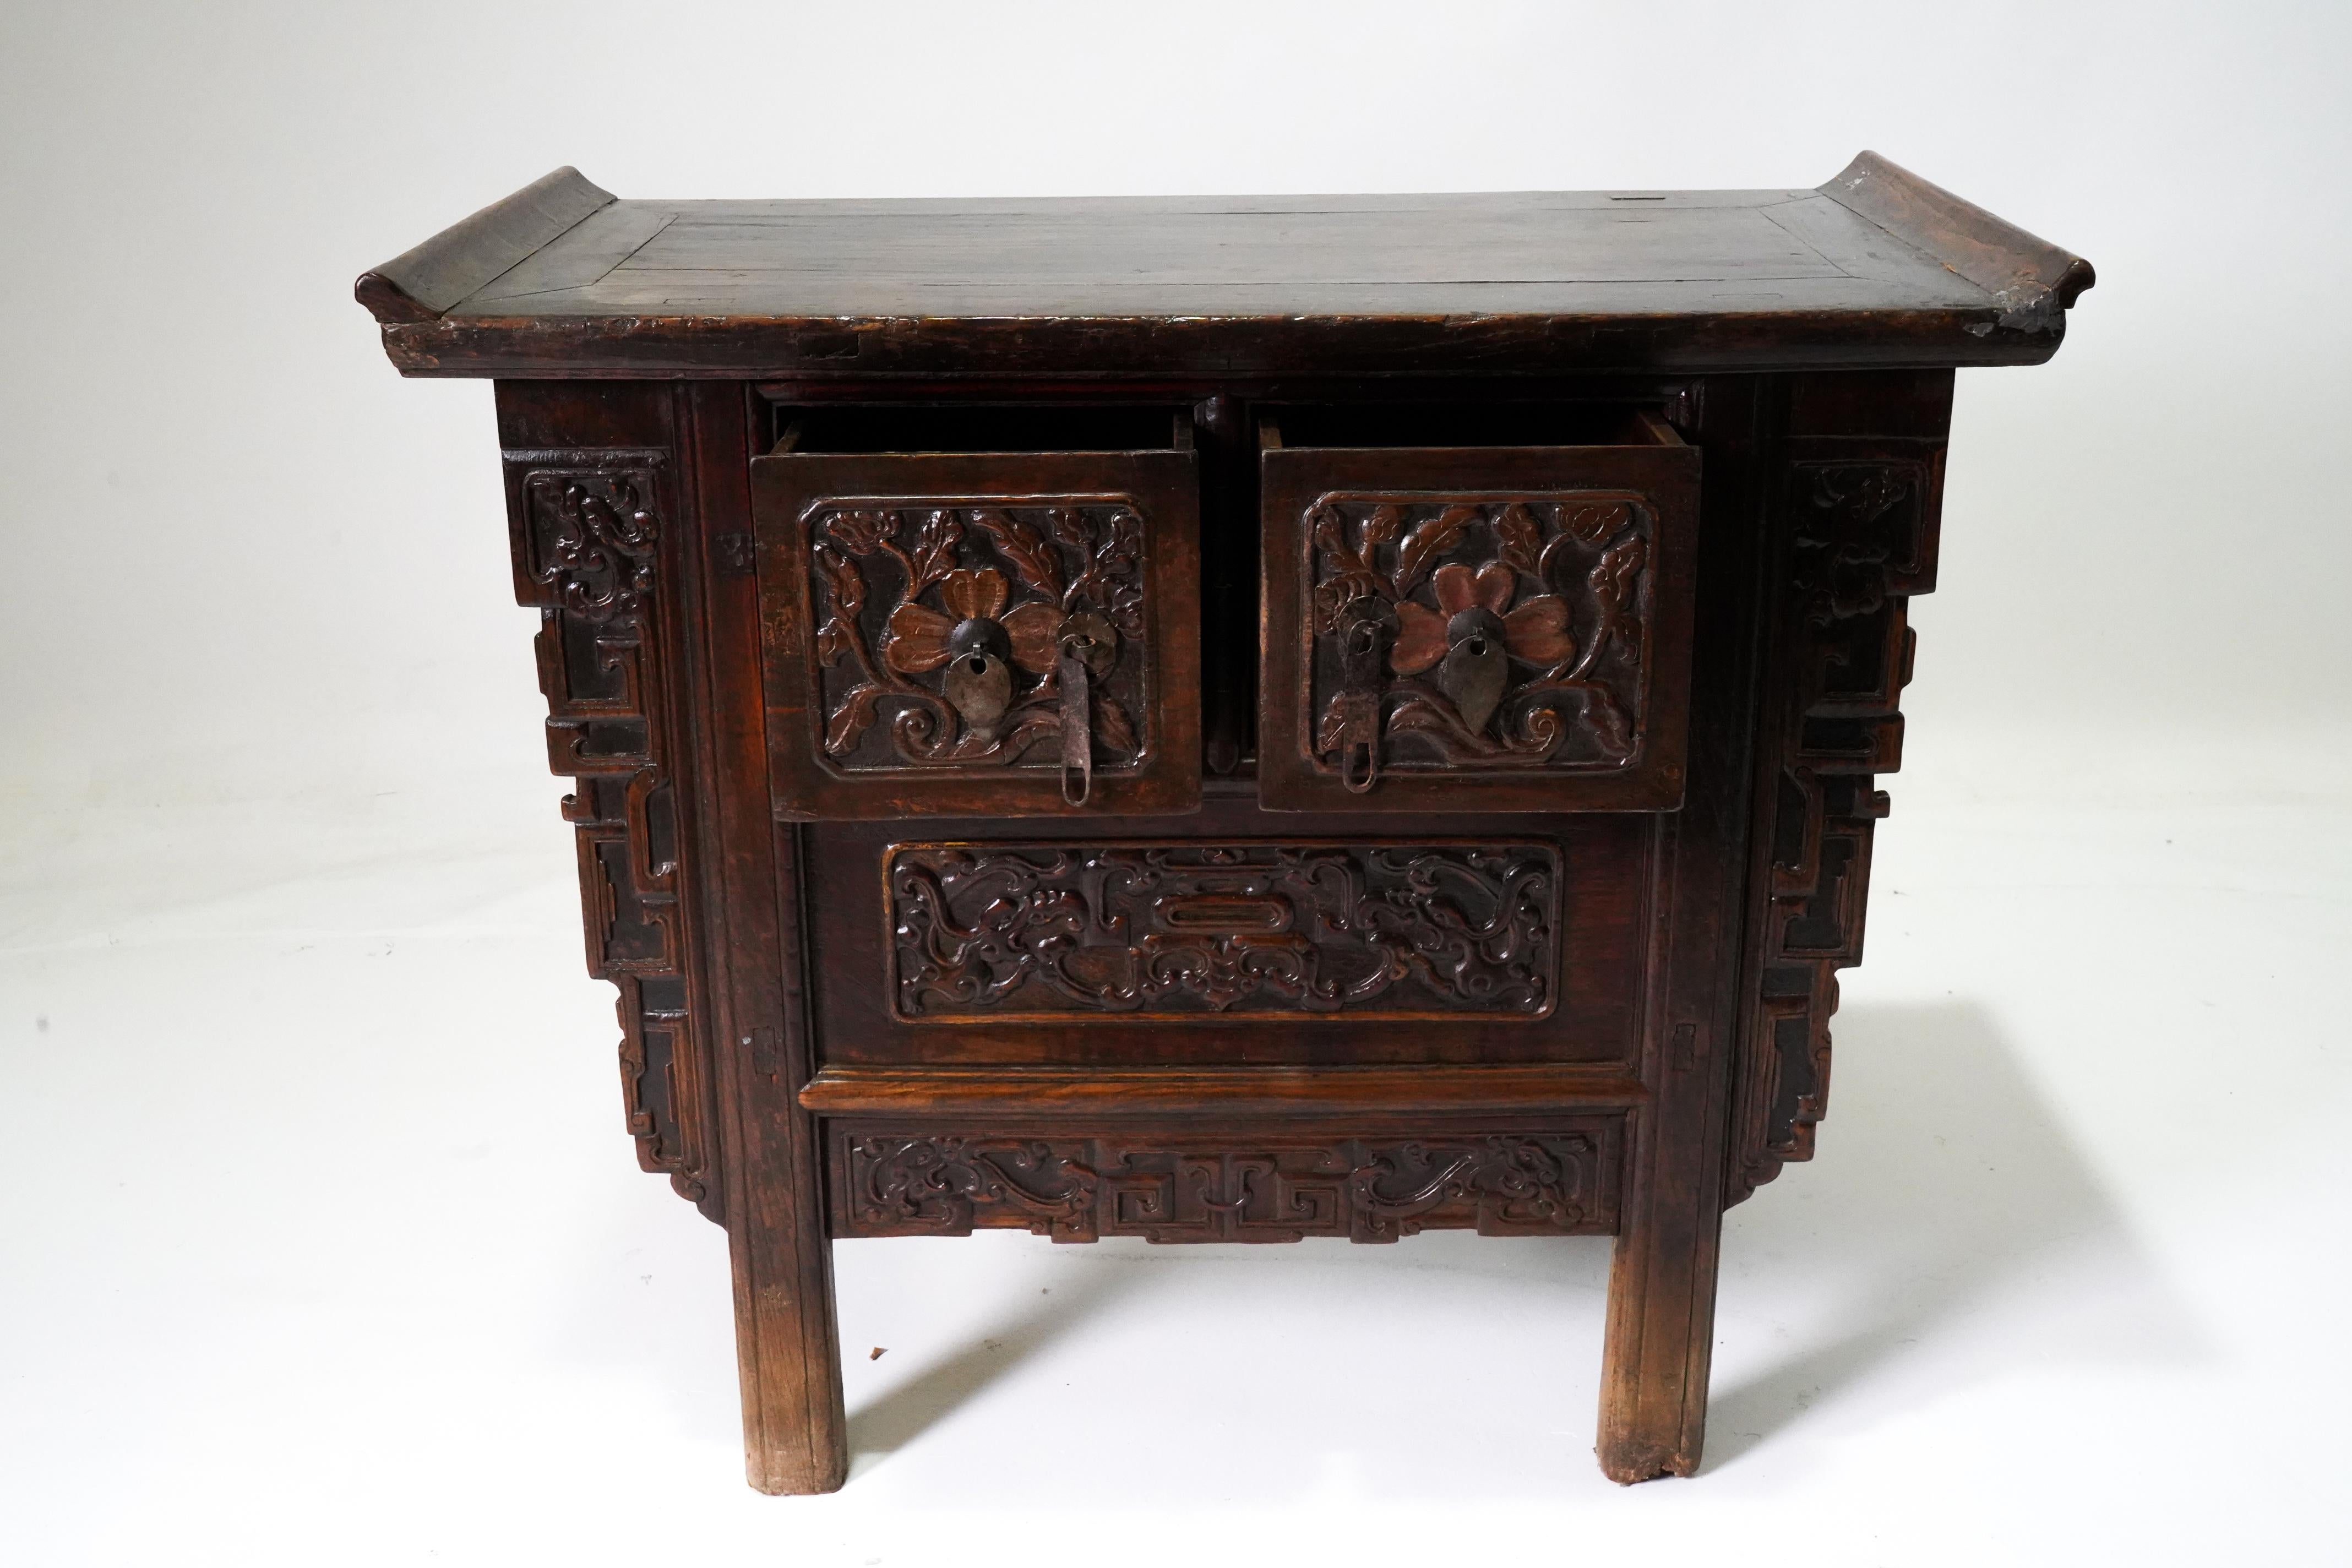 Chinese Rare C. 1850 Qing Storage Cabinet with Carved Dragon Spandrels For Sale